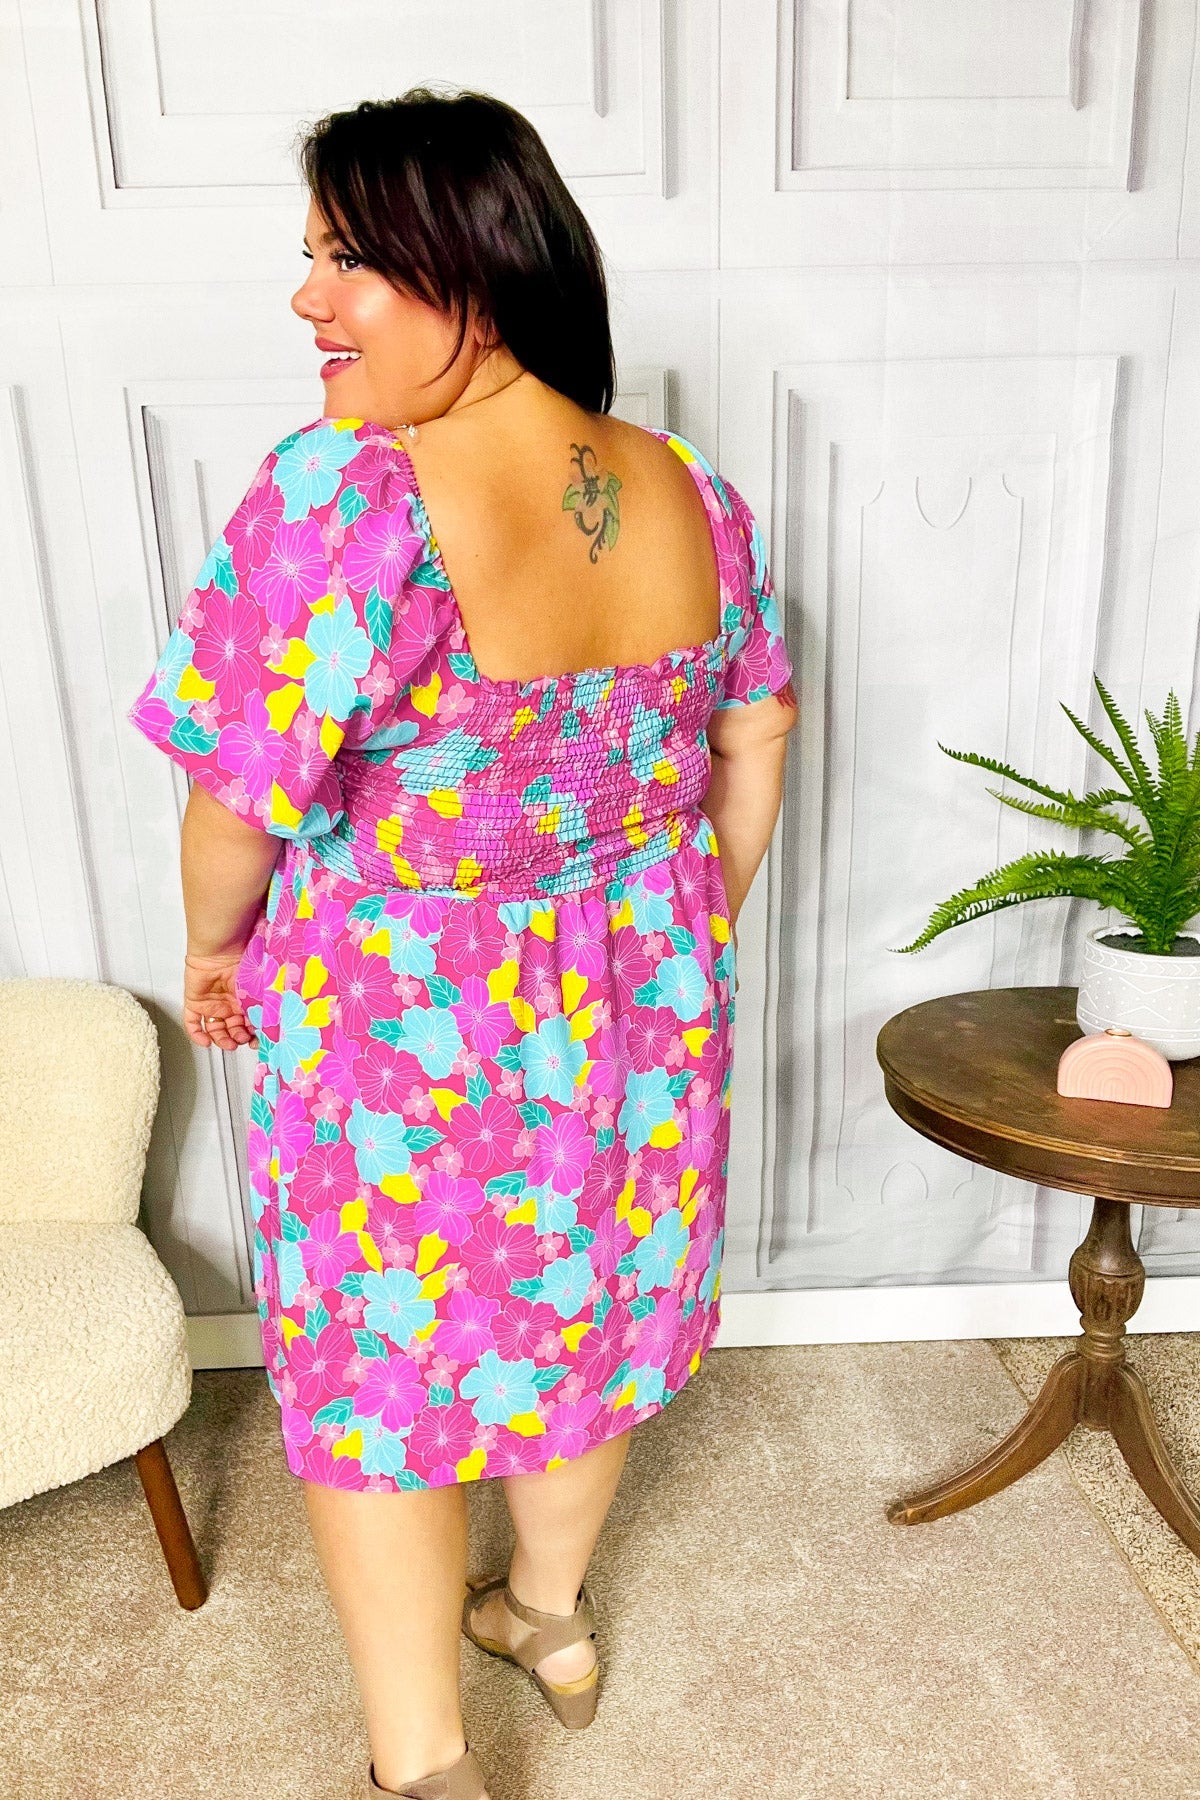 Vacay Vibes Fit & Flare Smocked Dress in Fuchsia